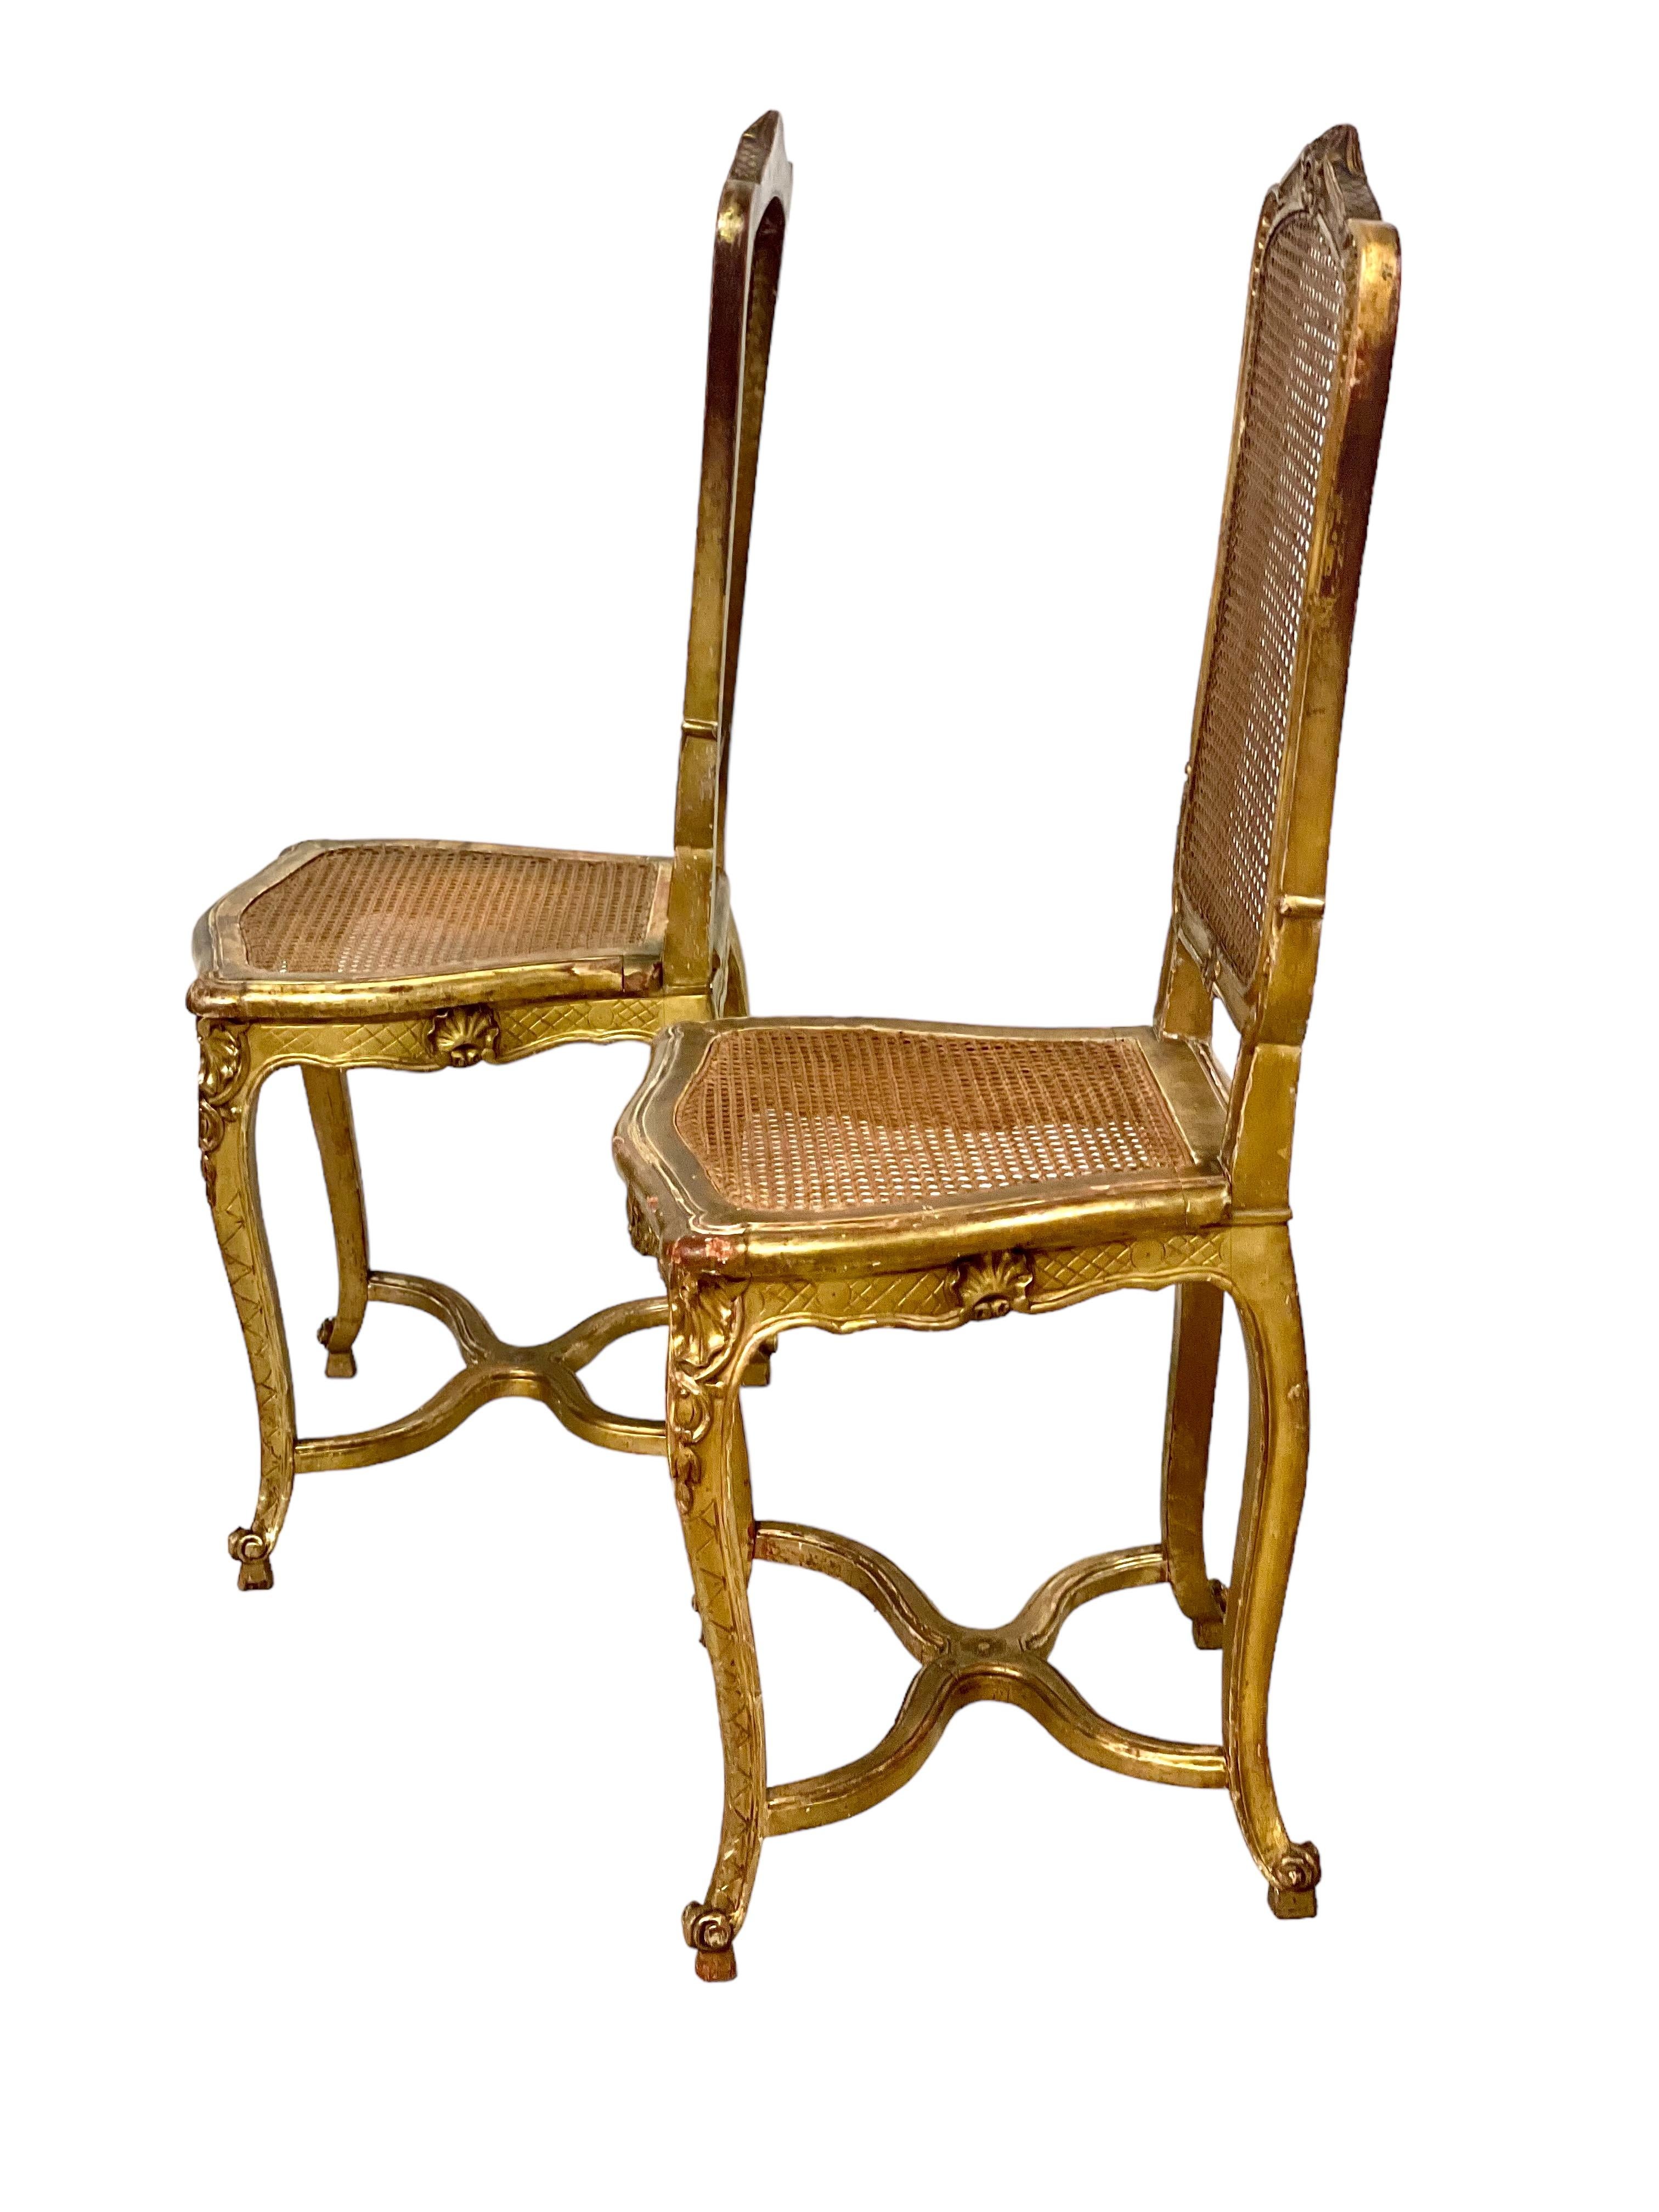 A delightful pair of late 19th century carved and moulded giltwood side chairs, with caned seats and backrests. These elegant chairs, with their high, cartouche-style backs, are raised on cabriole legs joined by a delicately curved X-shaped